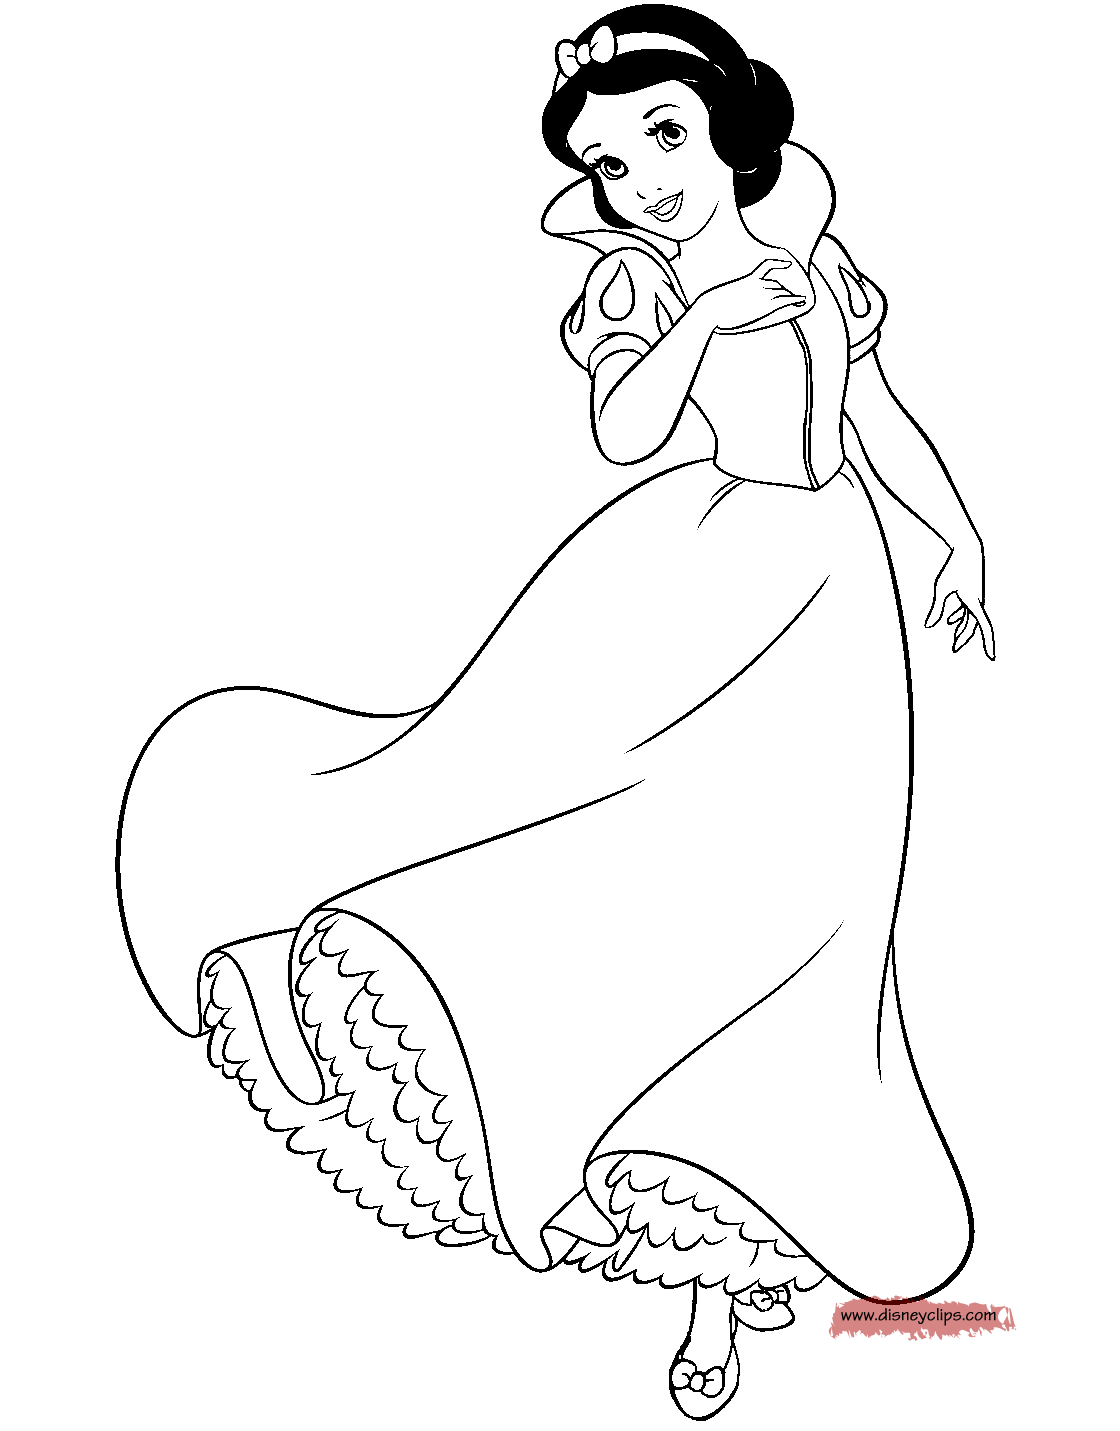 Disney Snow White Printable Coloring Pages 20   Disney Coloring ...